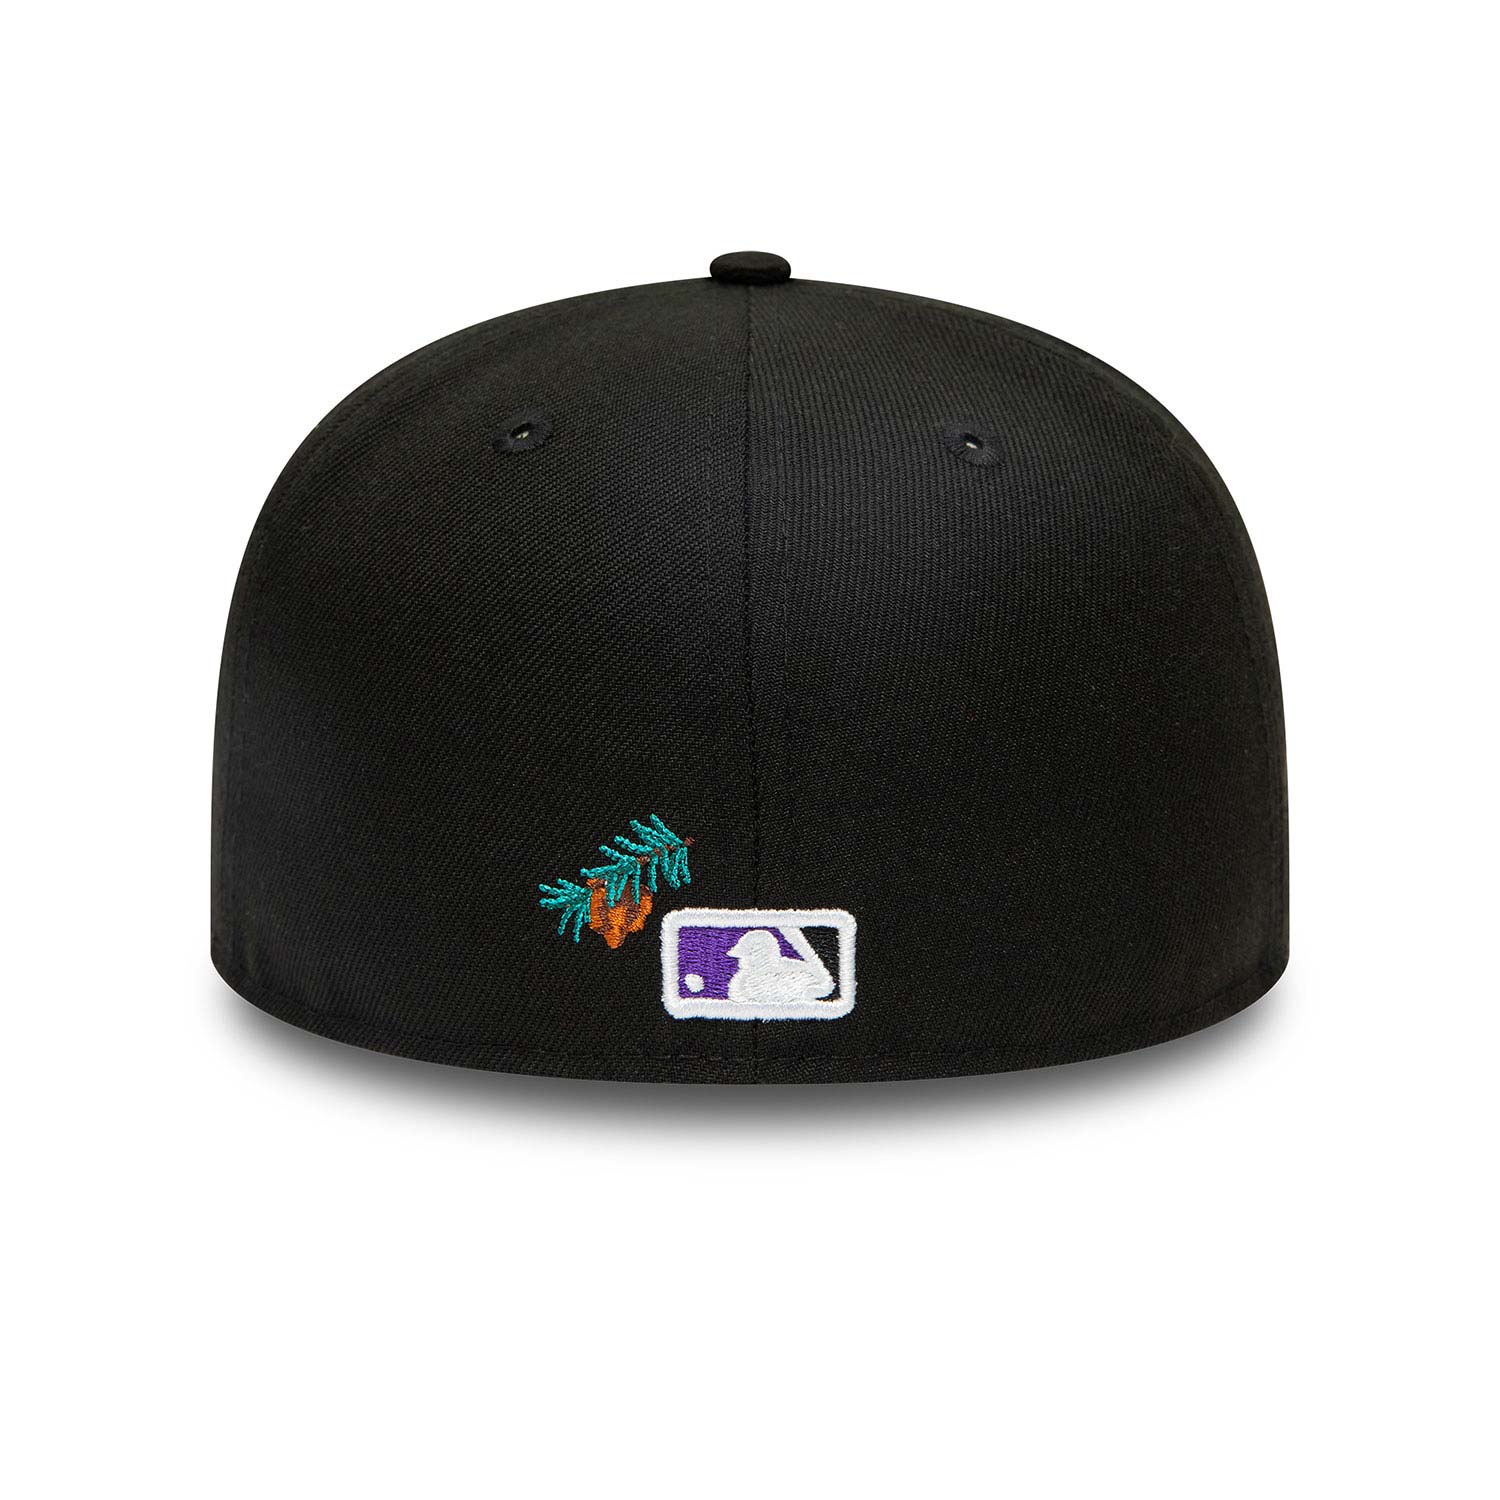 Colorado Rockies Stateview Black 59FIFTY Fitted Cap